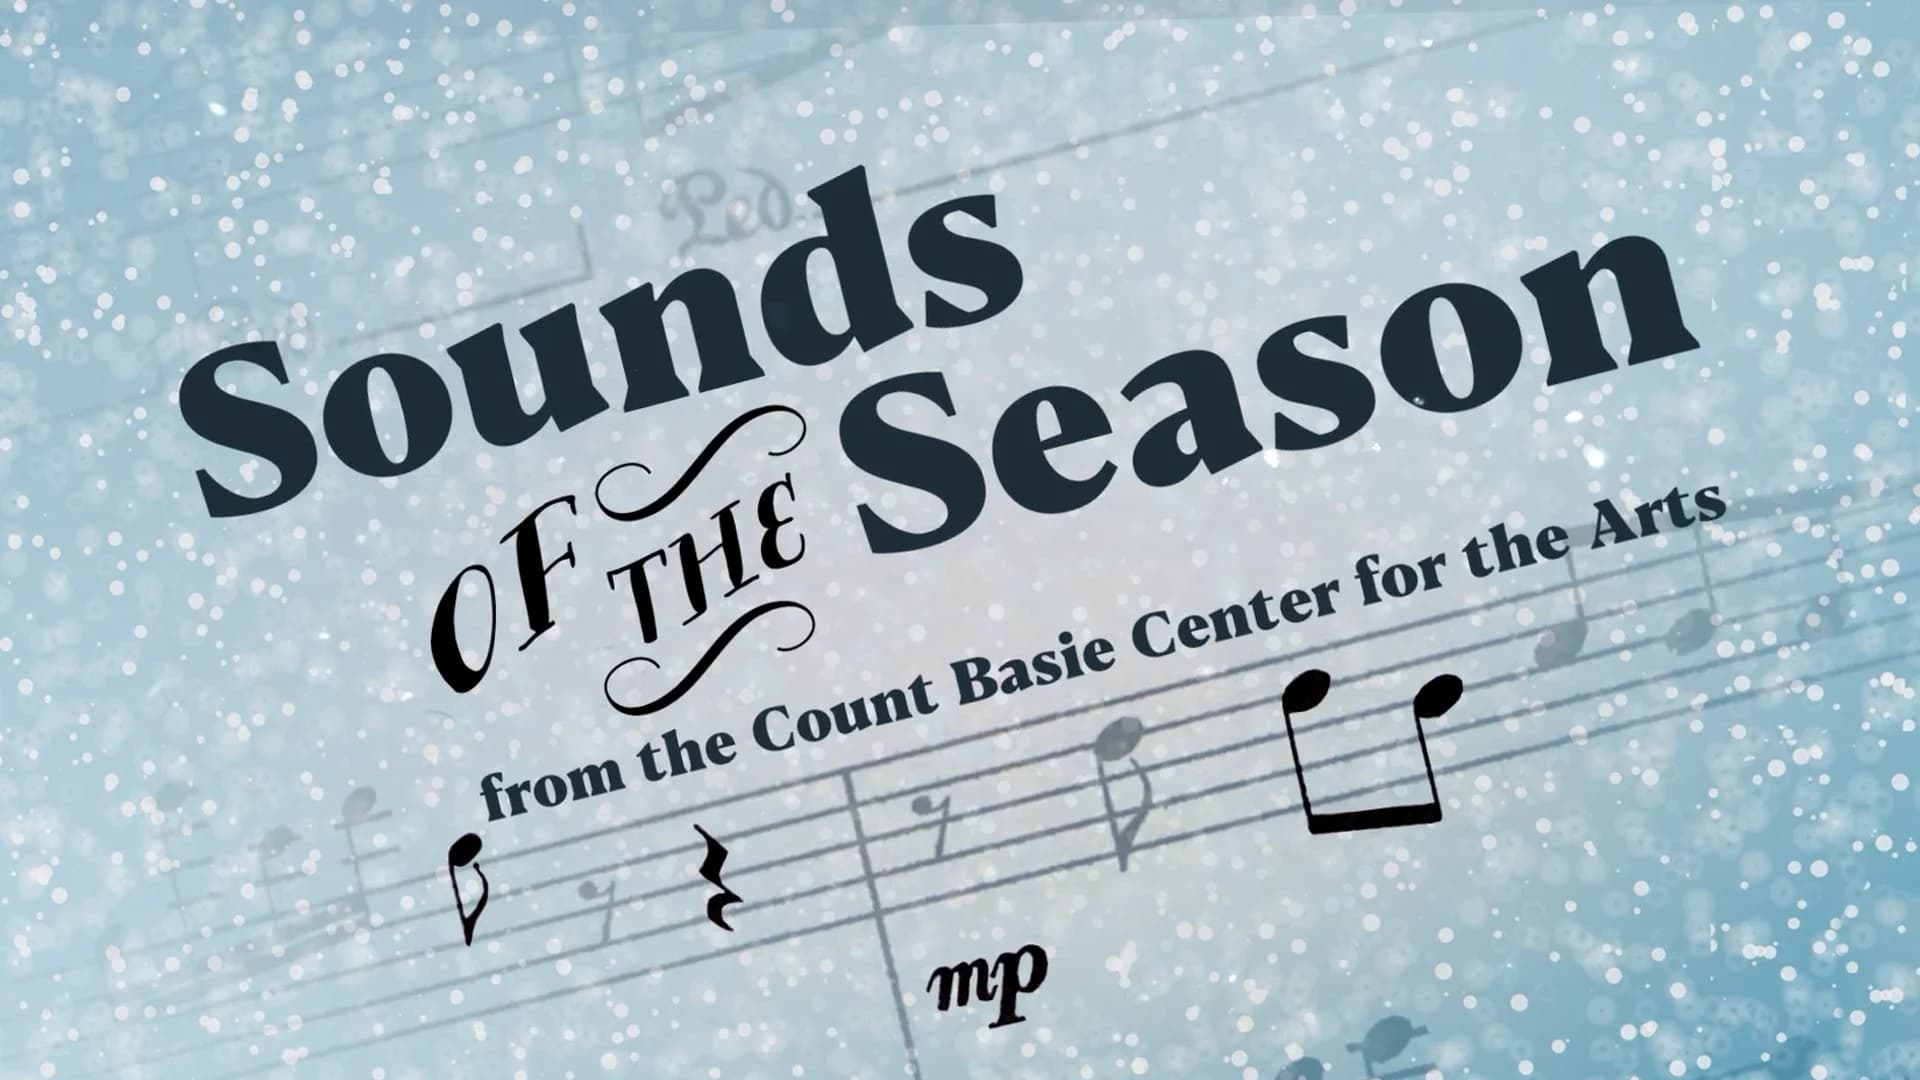 News 12 New Jersey’s 2020 Sounds of the Season show schedule